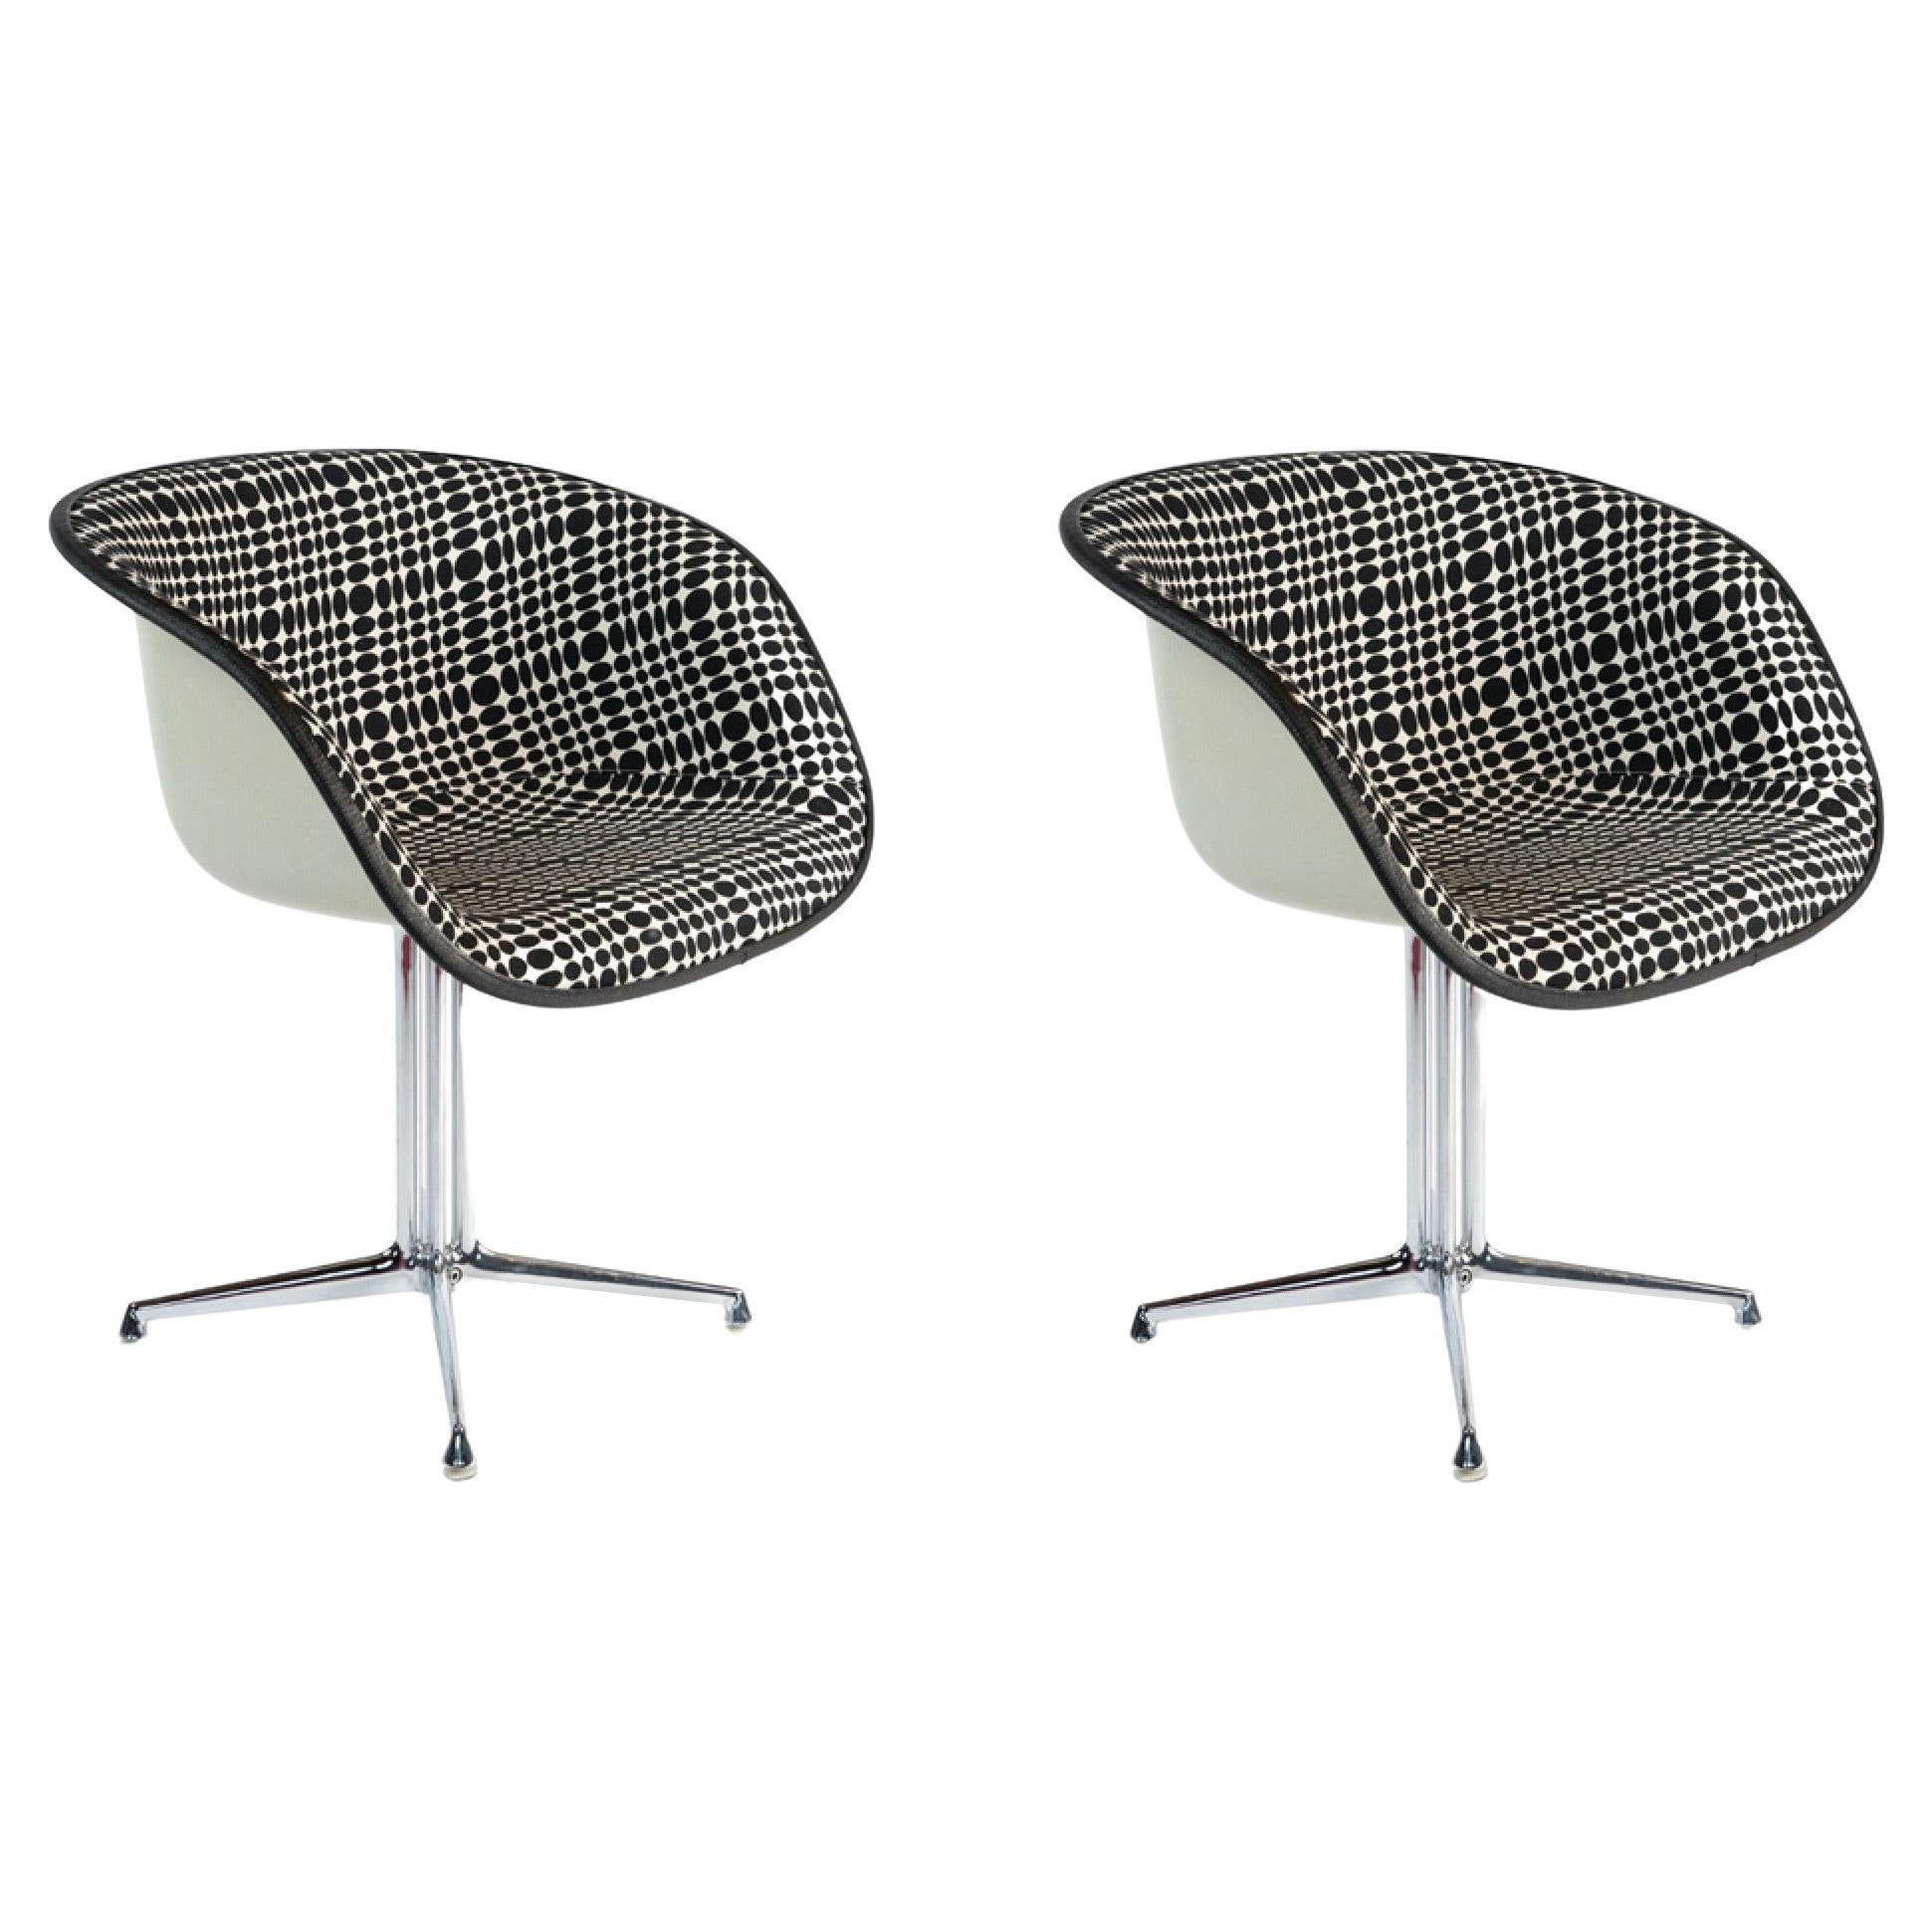 La Fonda Chairs by Eames for Herman Miller in Verner Panton Fabric